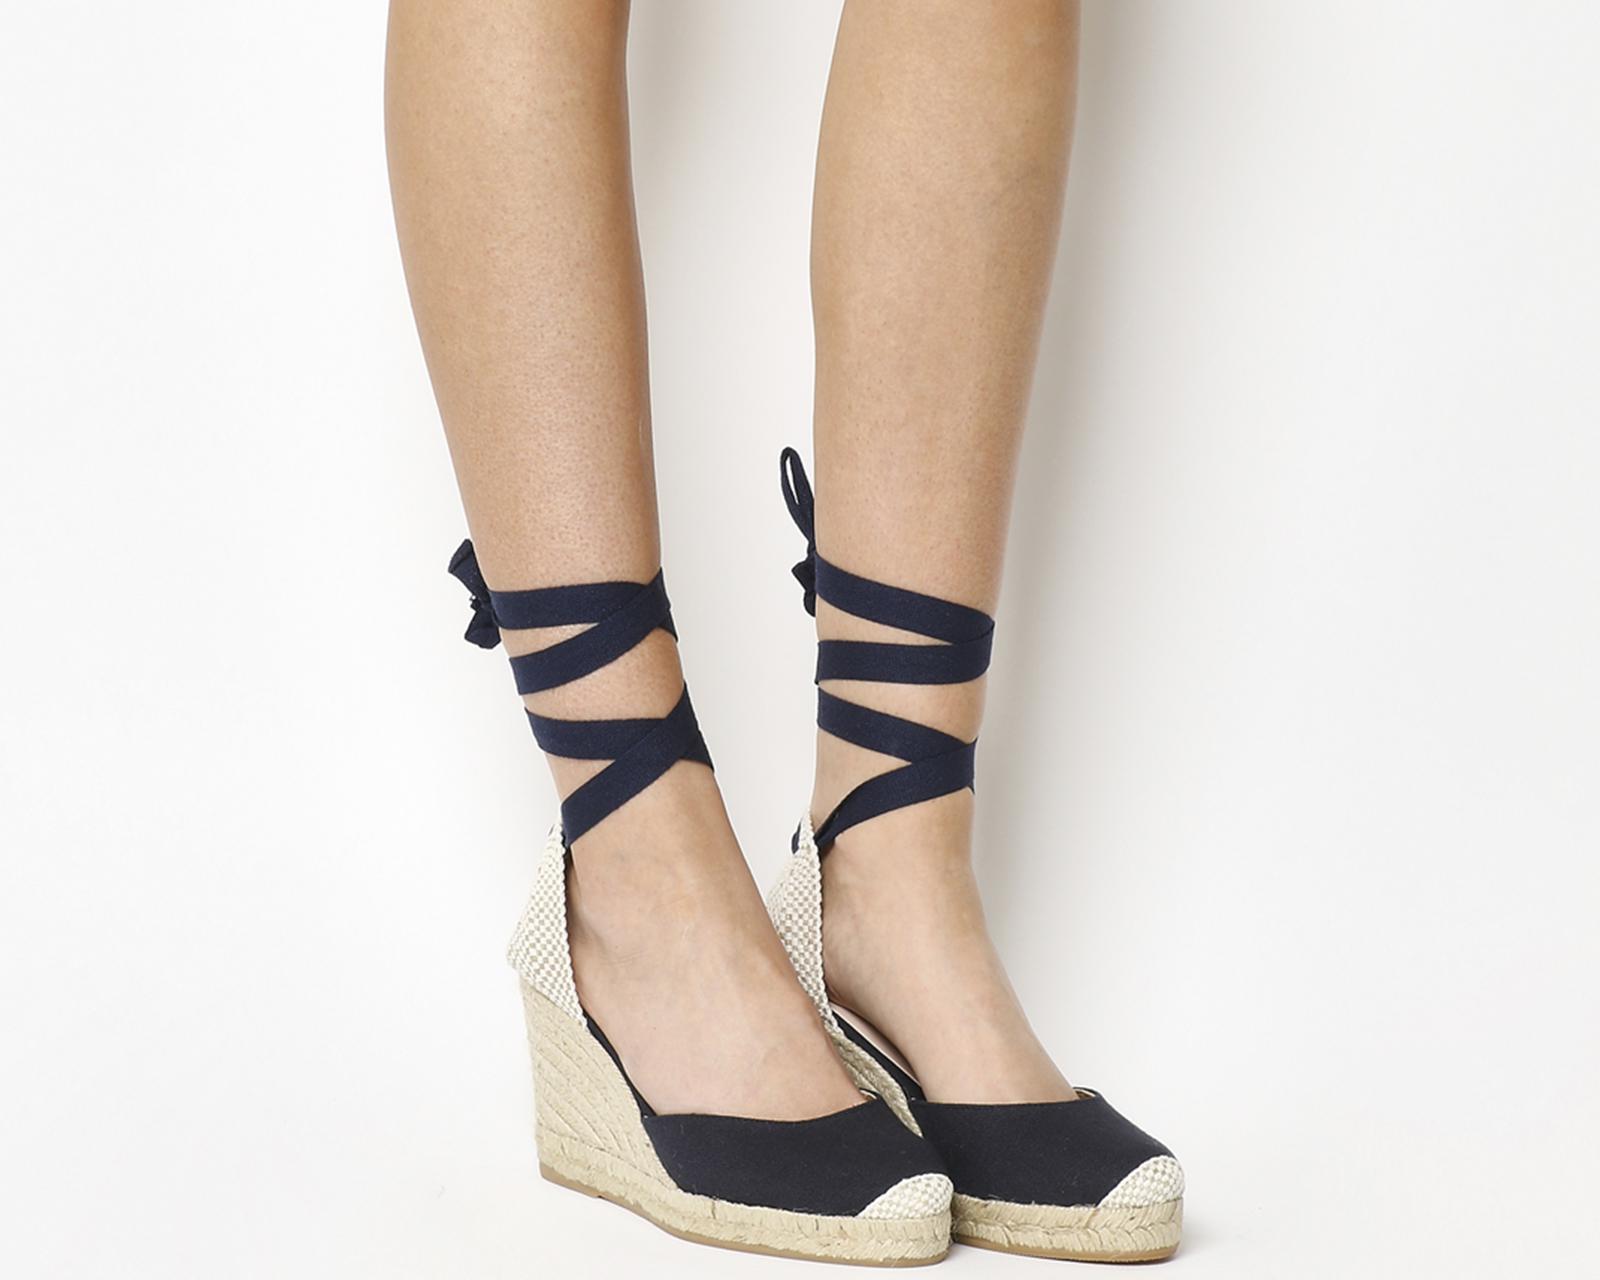 Marmalade Espadrille Wedges in Navy 